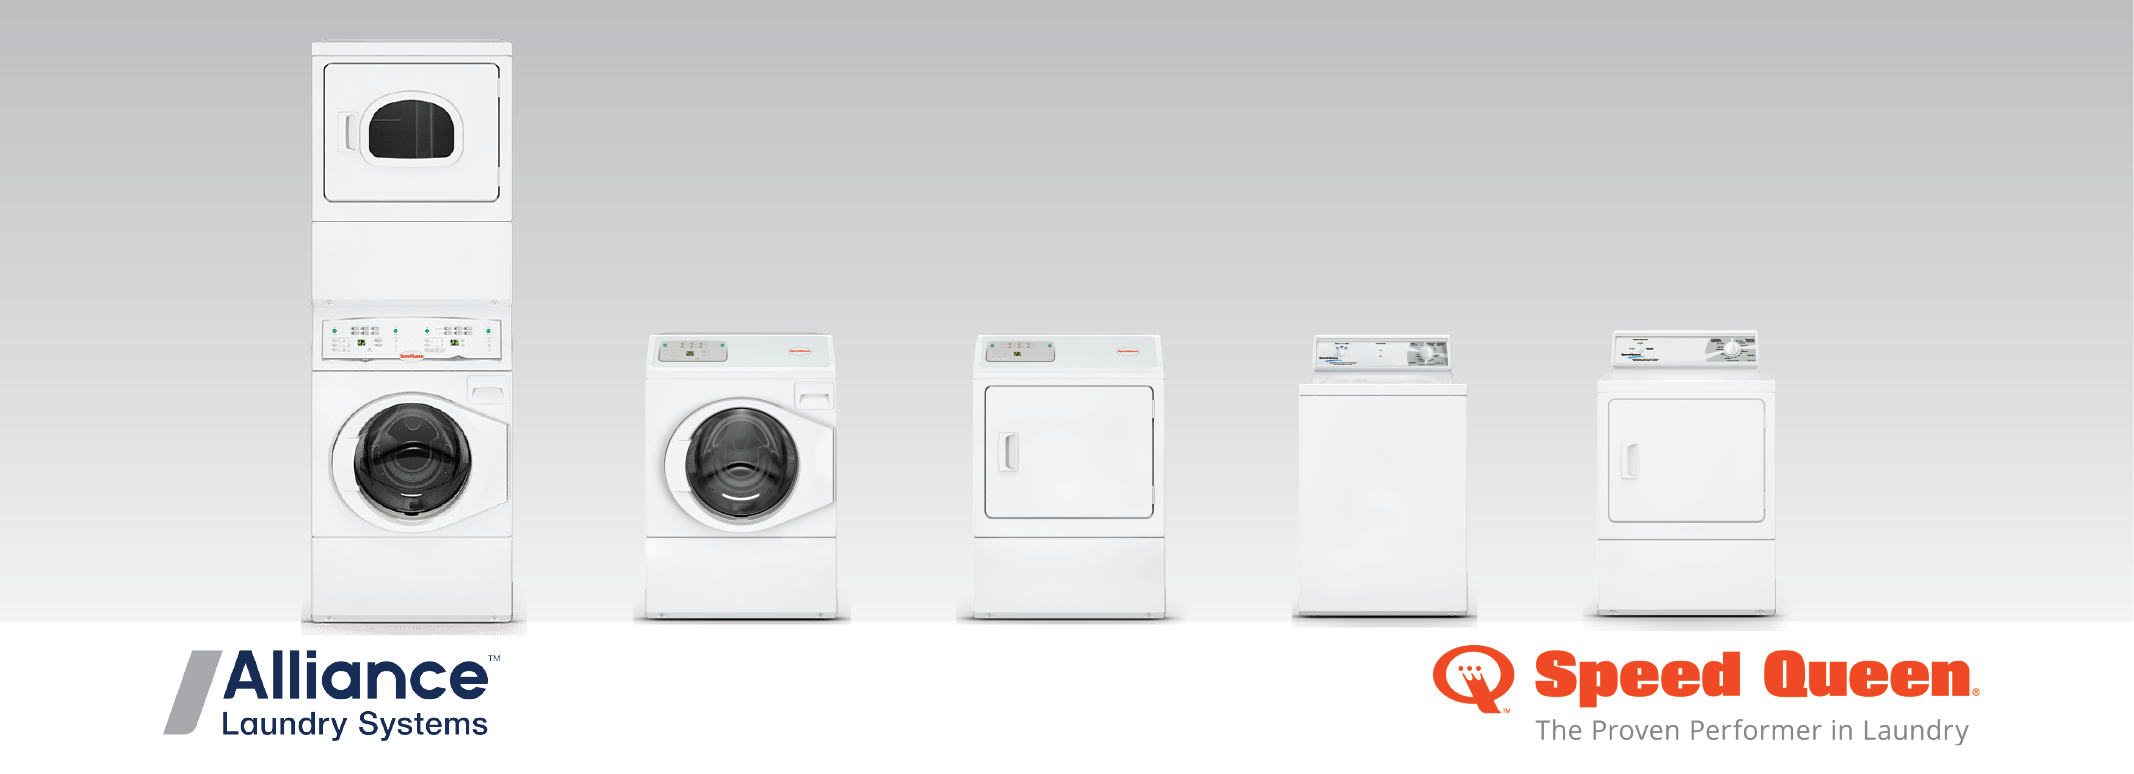 Electric Sales & Service Ltd. - Laundry appliances & equipment - Speed Queen - Range of Products